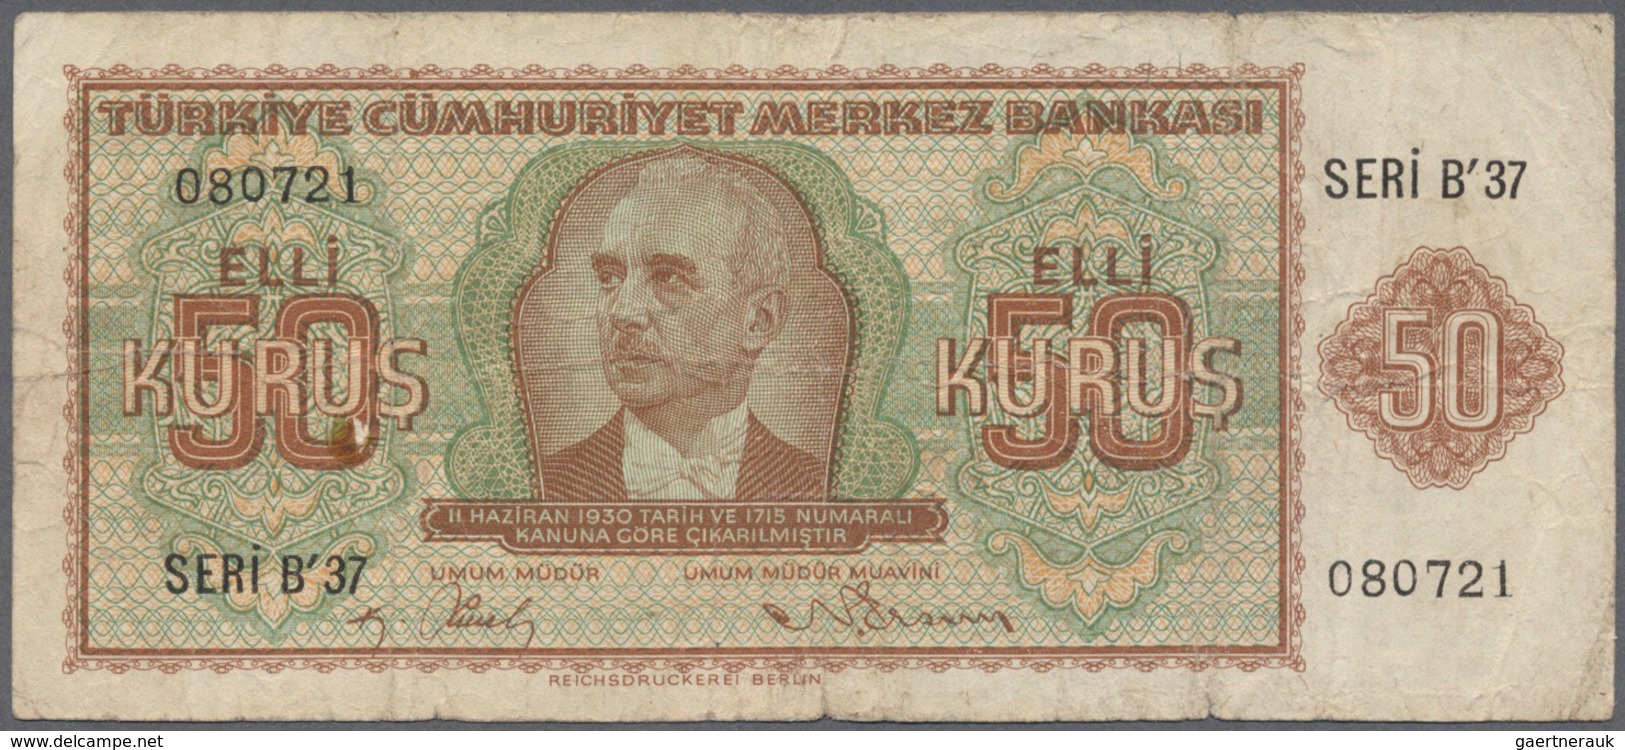 02528 Turkey / Türkei: 50 Kurus ND(1944) P. 134, Used With Several Folds And Staining In Paper, No Holes O - Turquia